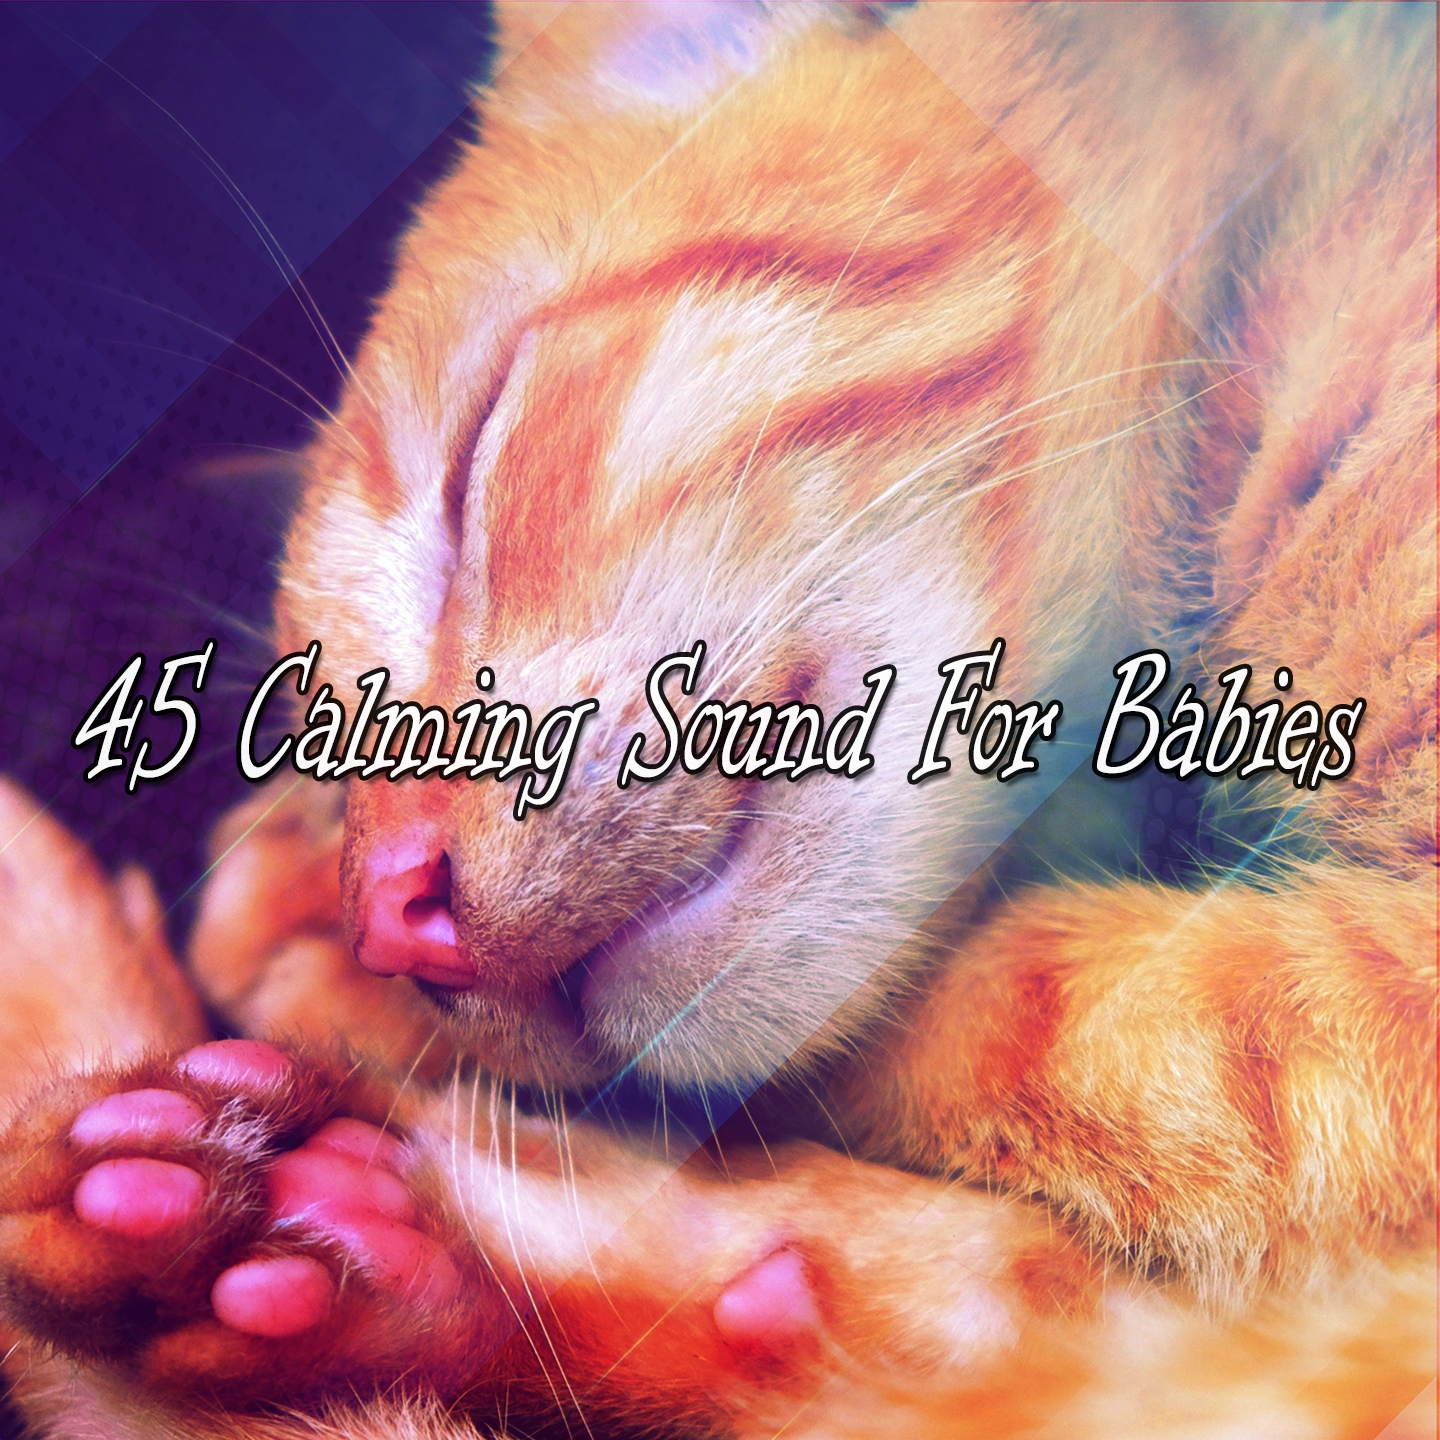 45 Calming Sound For Babies